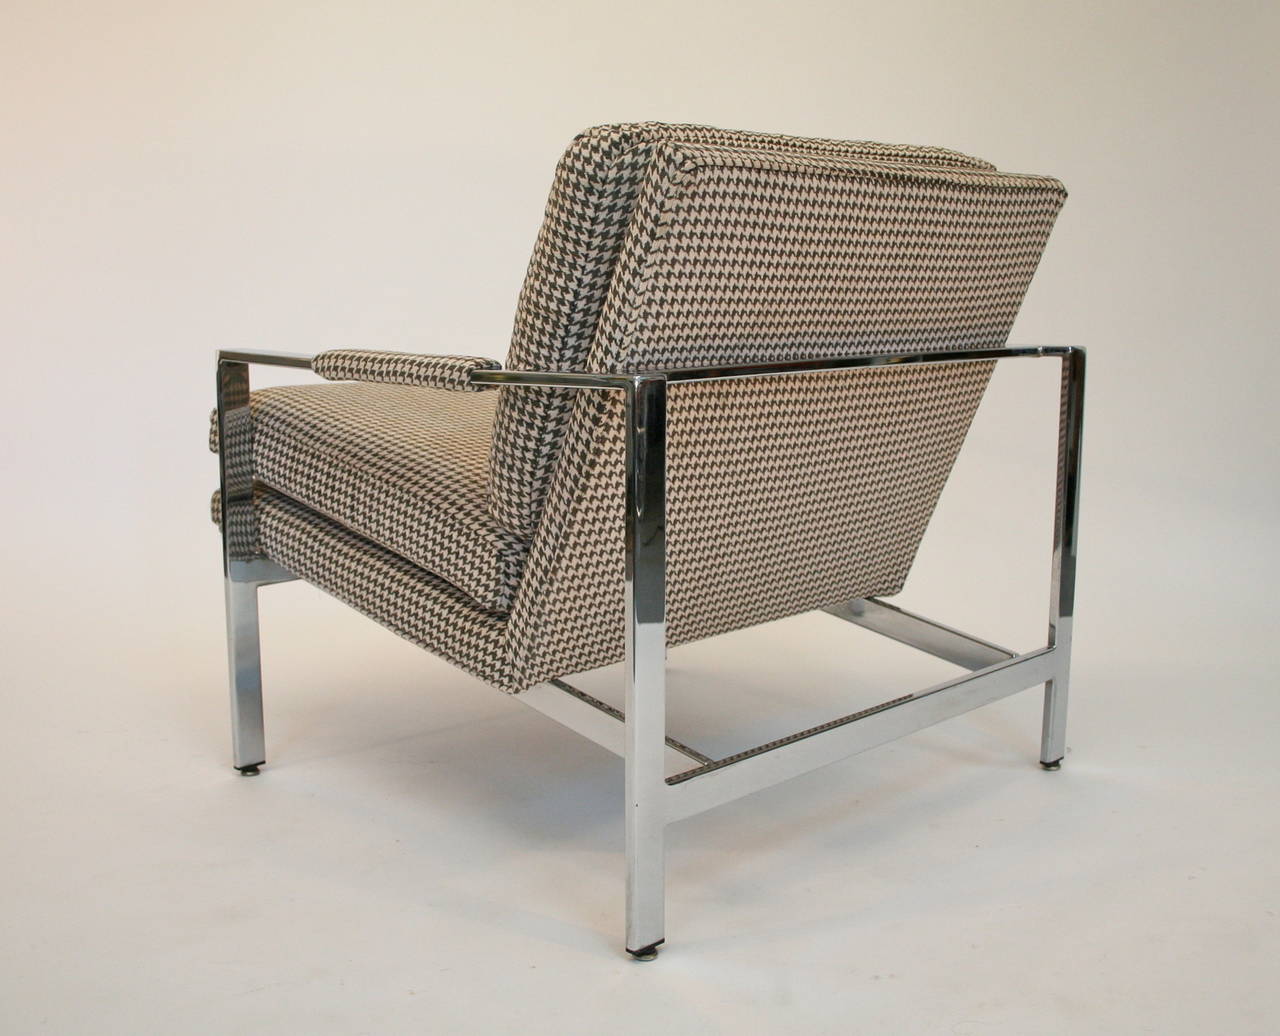 Milo Baughman Chrome Flat Bar Lounge Chair for Thayer Coggin.  Newly upholstered in houndstooth fabric.  Circa 1970's.